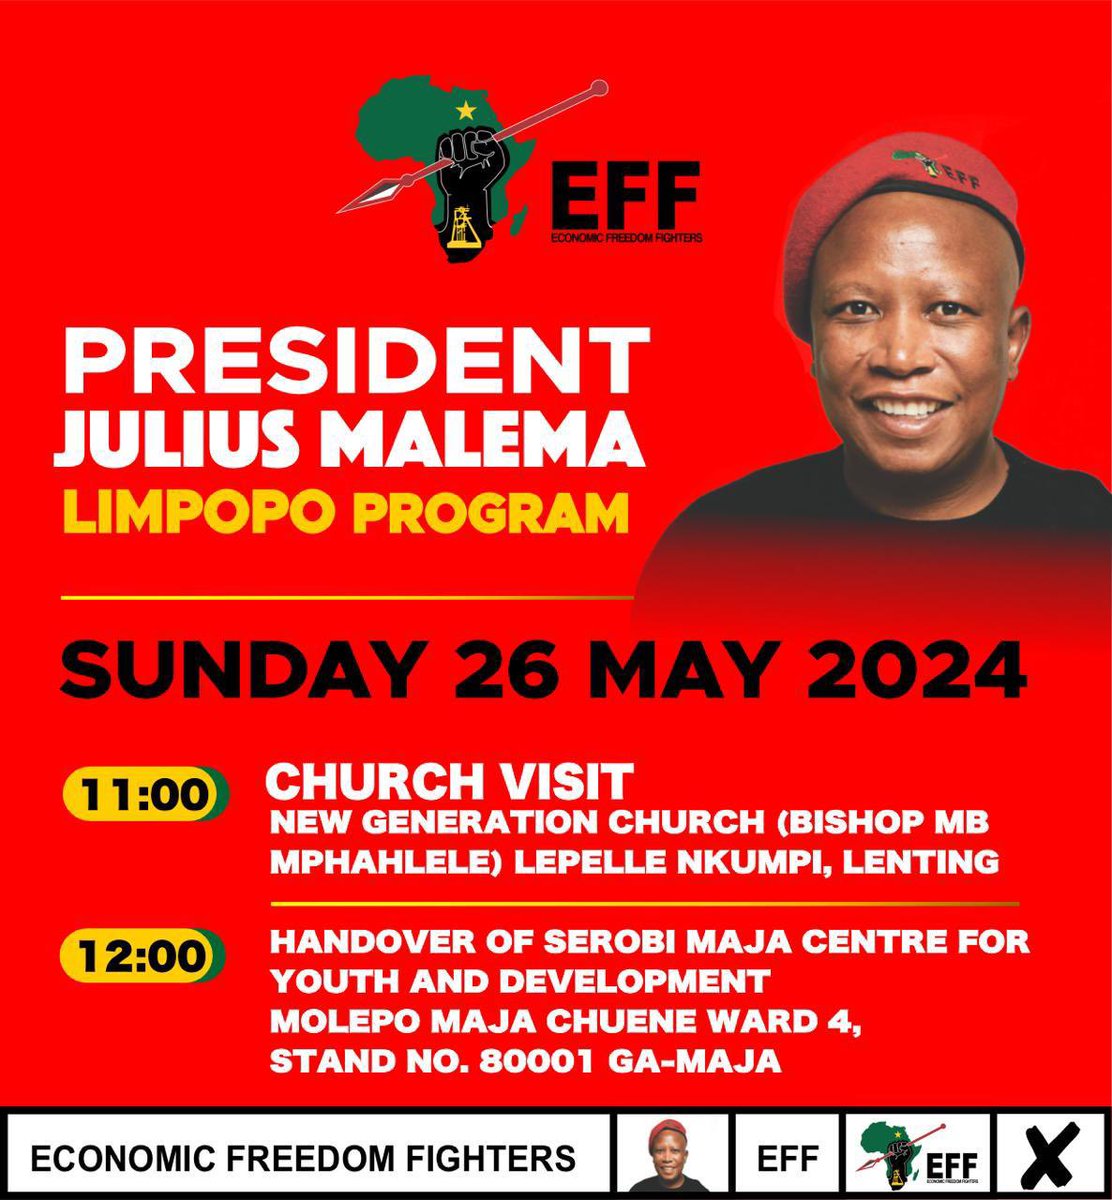 President @Julius_S_Malema will attend New Generation Church and also handover Serobi Maja Centre, for Youth and Development.